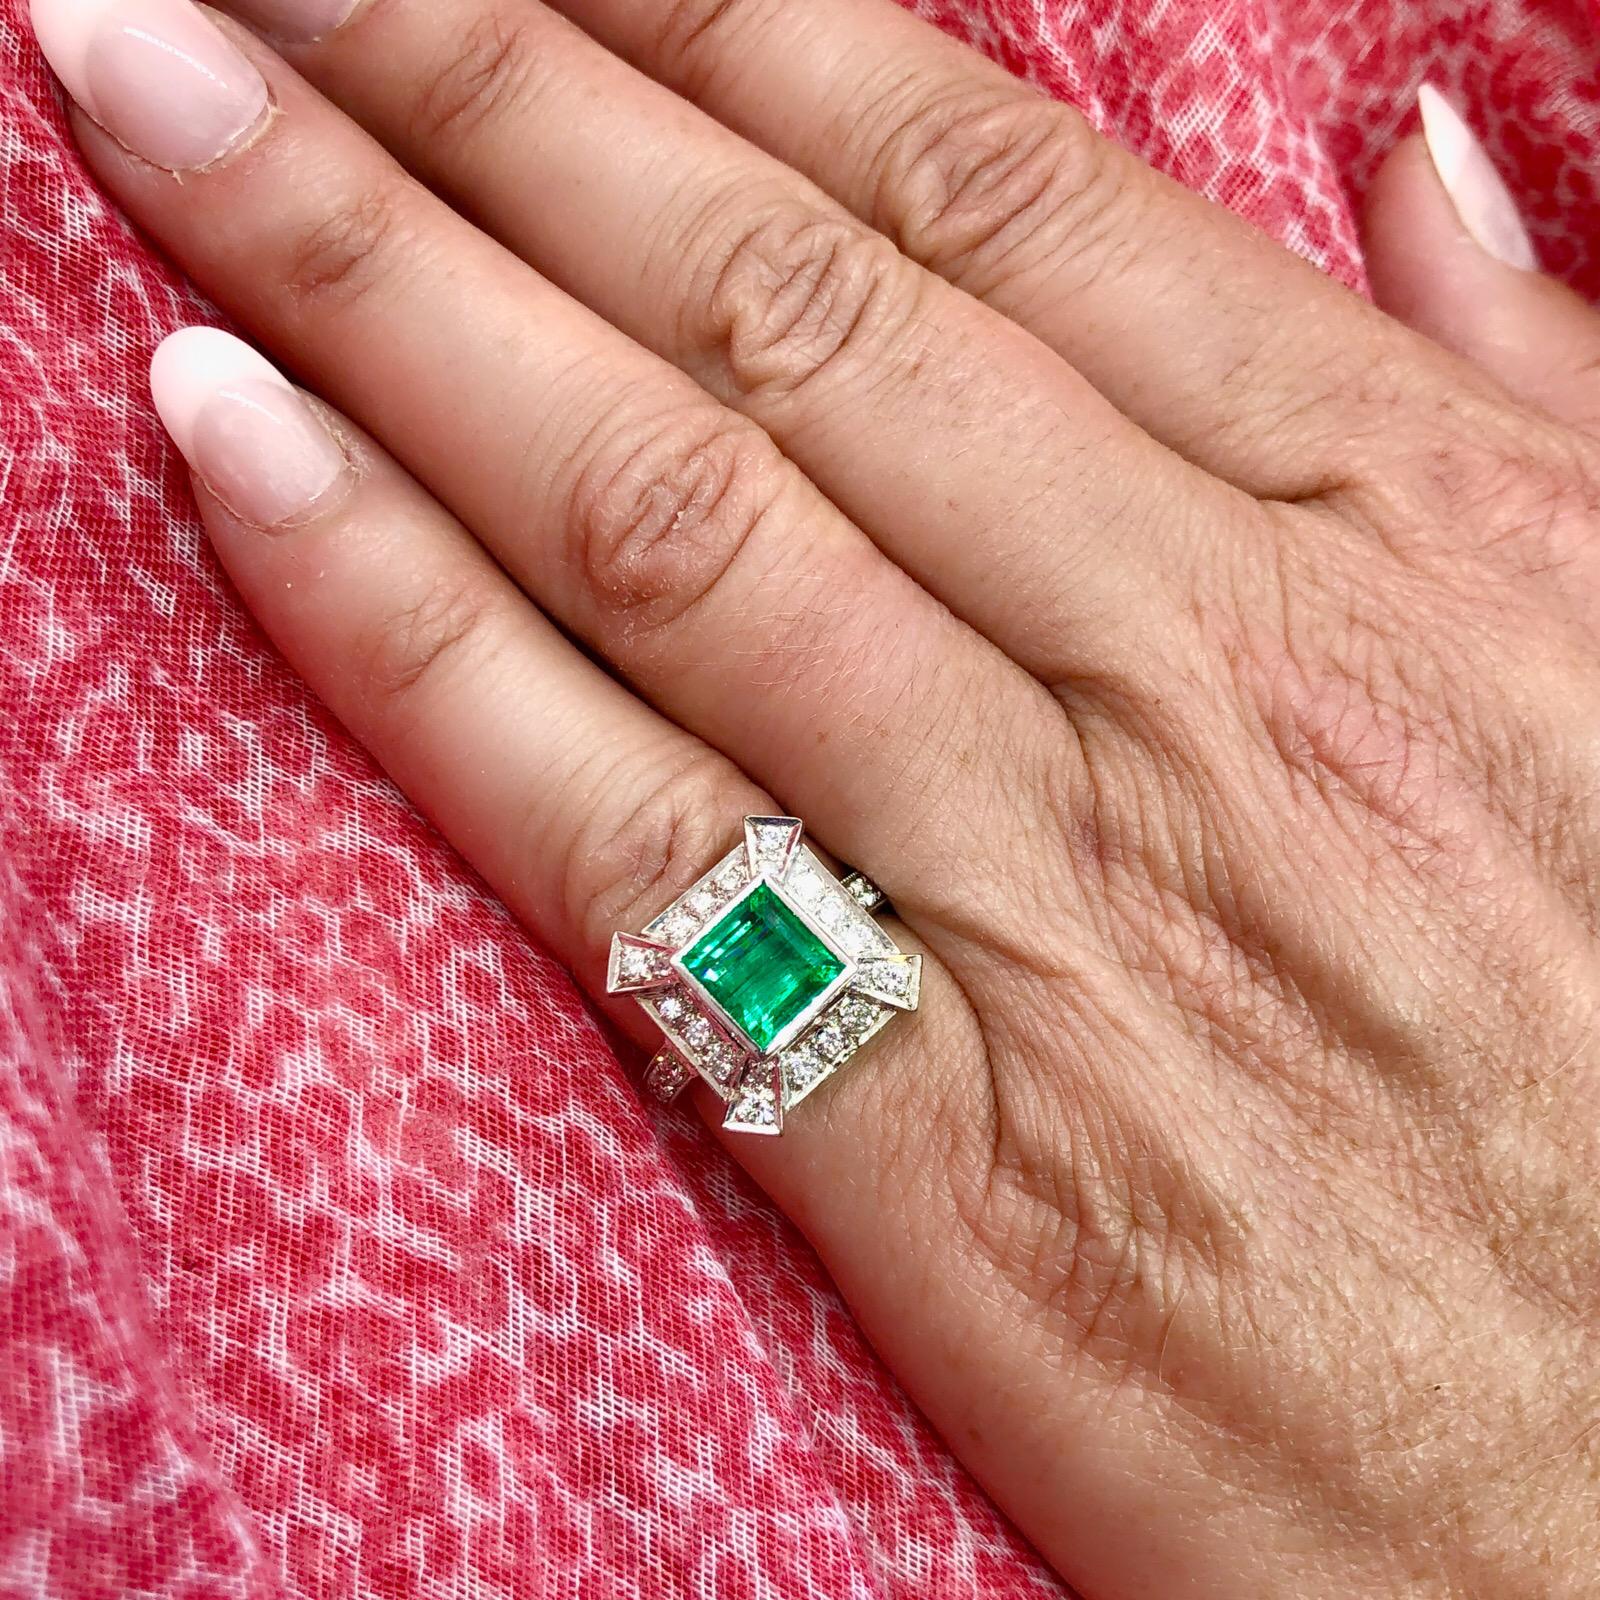 A contemporary Deco style ring featuring a square cut 2.25 carat emerald in a platinum setting enhanced with 30 round brilliant cut diamonds, totaling 0.82 carat. The ring measures 16mm to 2mm wide and is currently a size 4.75 with room to size up